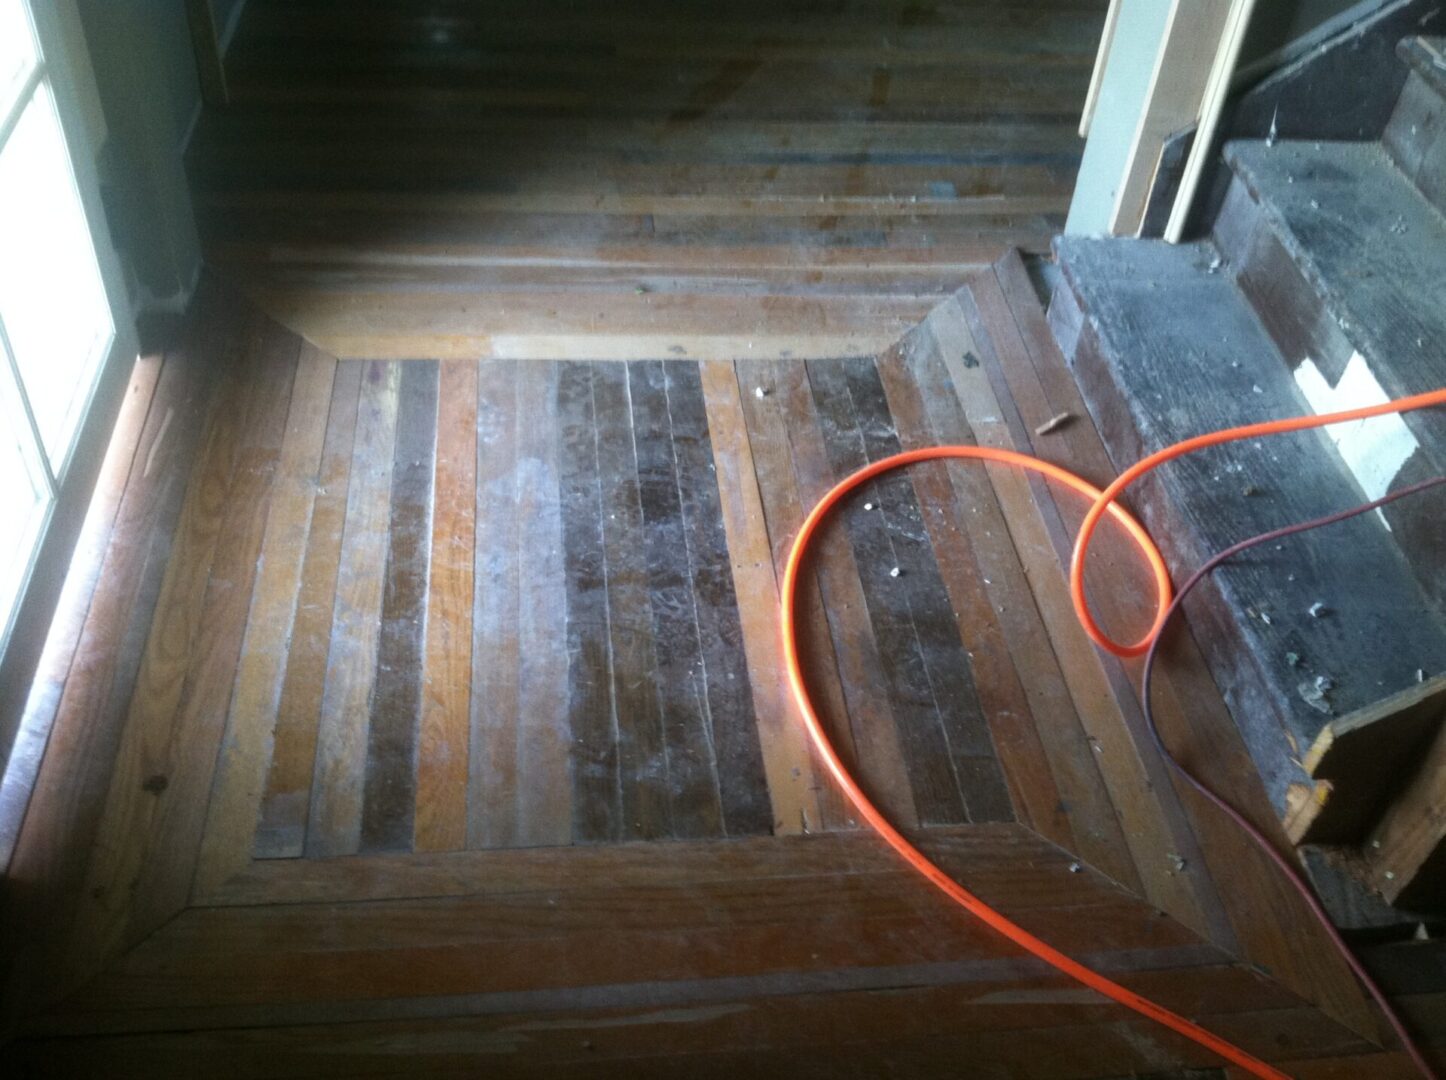 Wood flooring leading up to a staircase